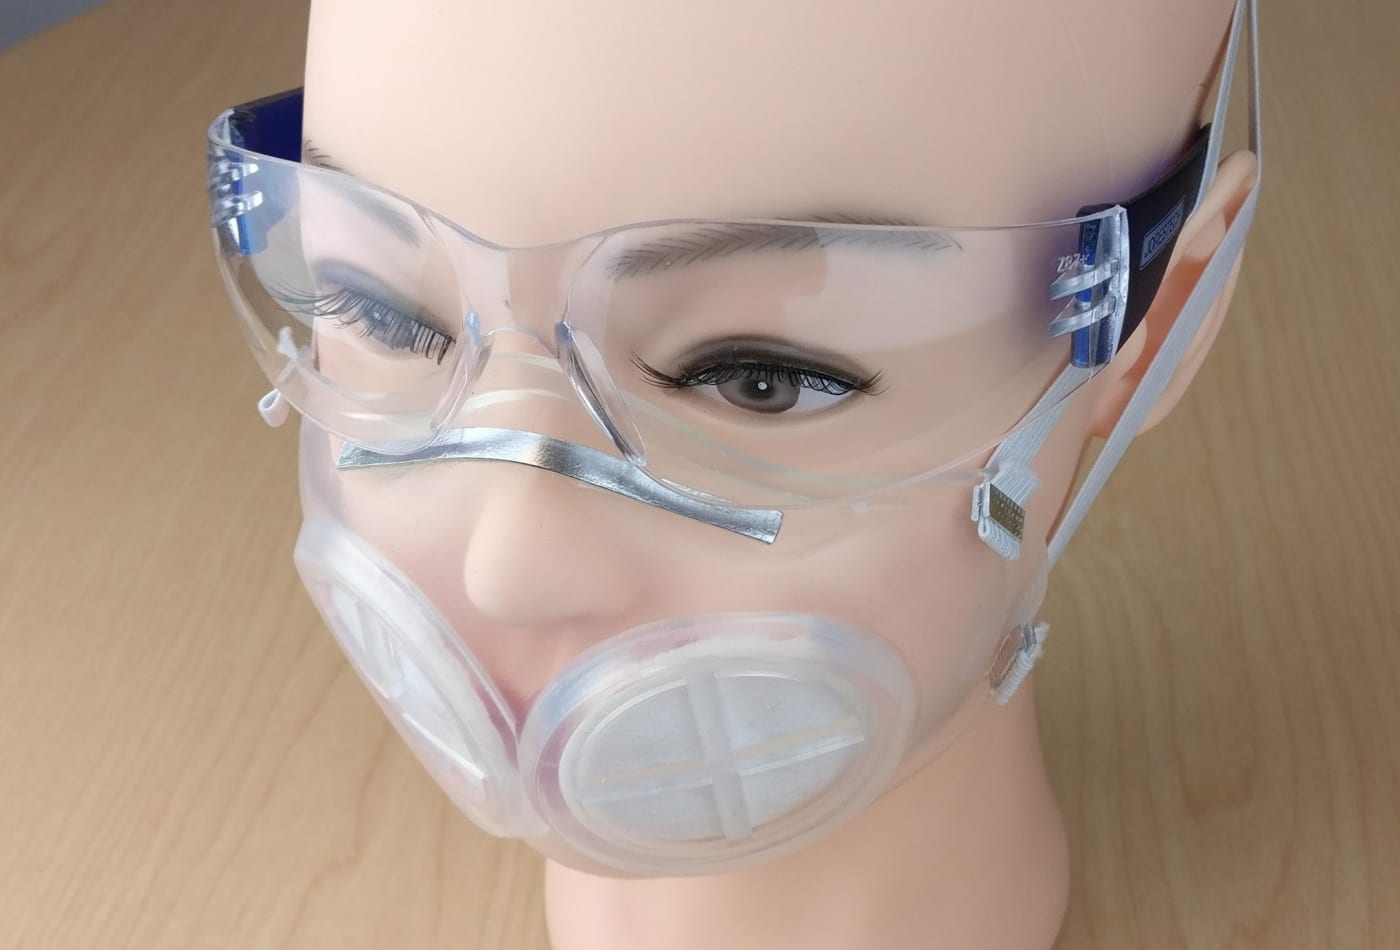 The iMASC is a clear rubber mask that covers the nose and mouth, with a nose bridge and two nylon elastic straps that go around the head. The fit was based on the 3M 1860 respirator, a particular style of N95 mask that's commonly used by healthcare providers.